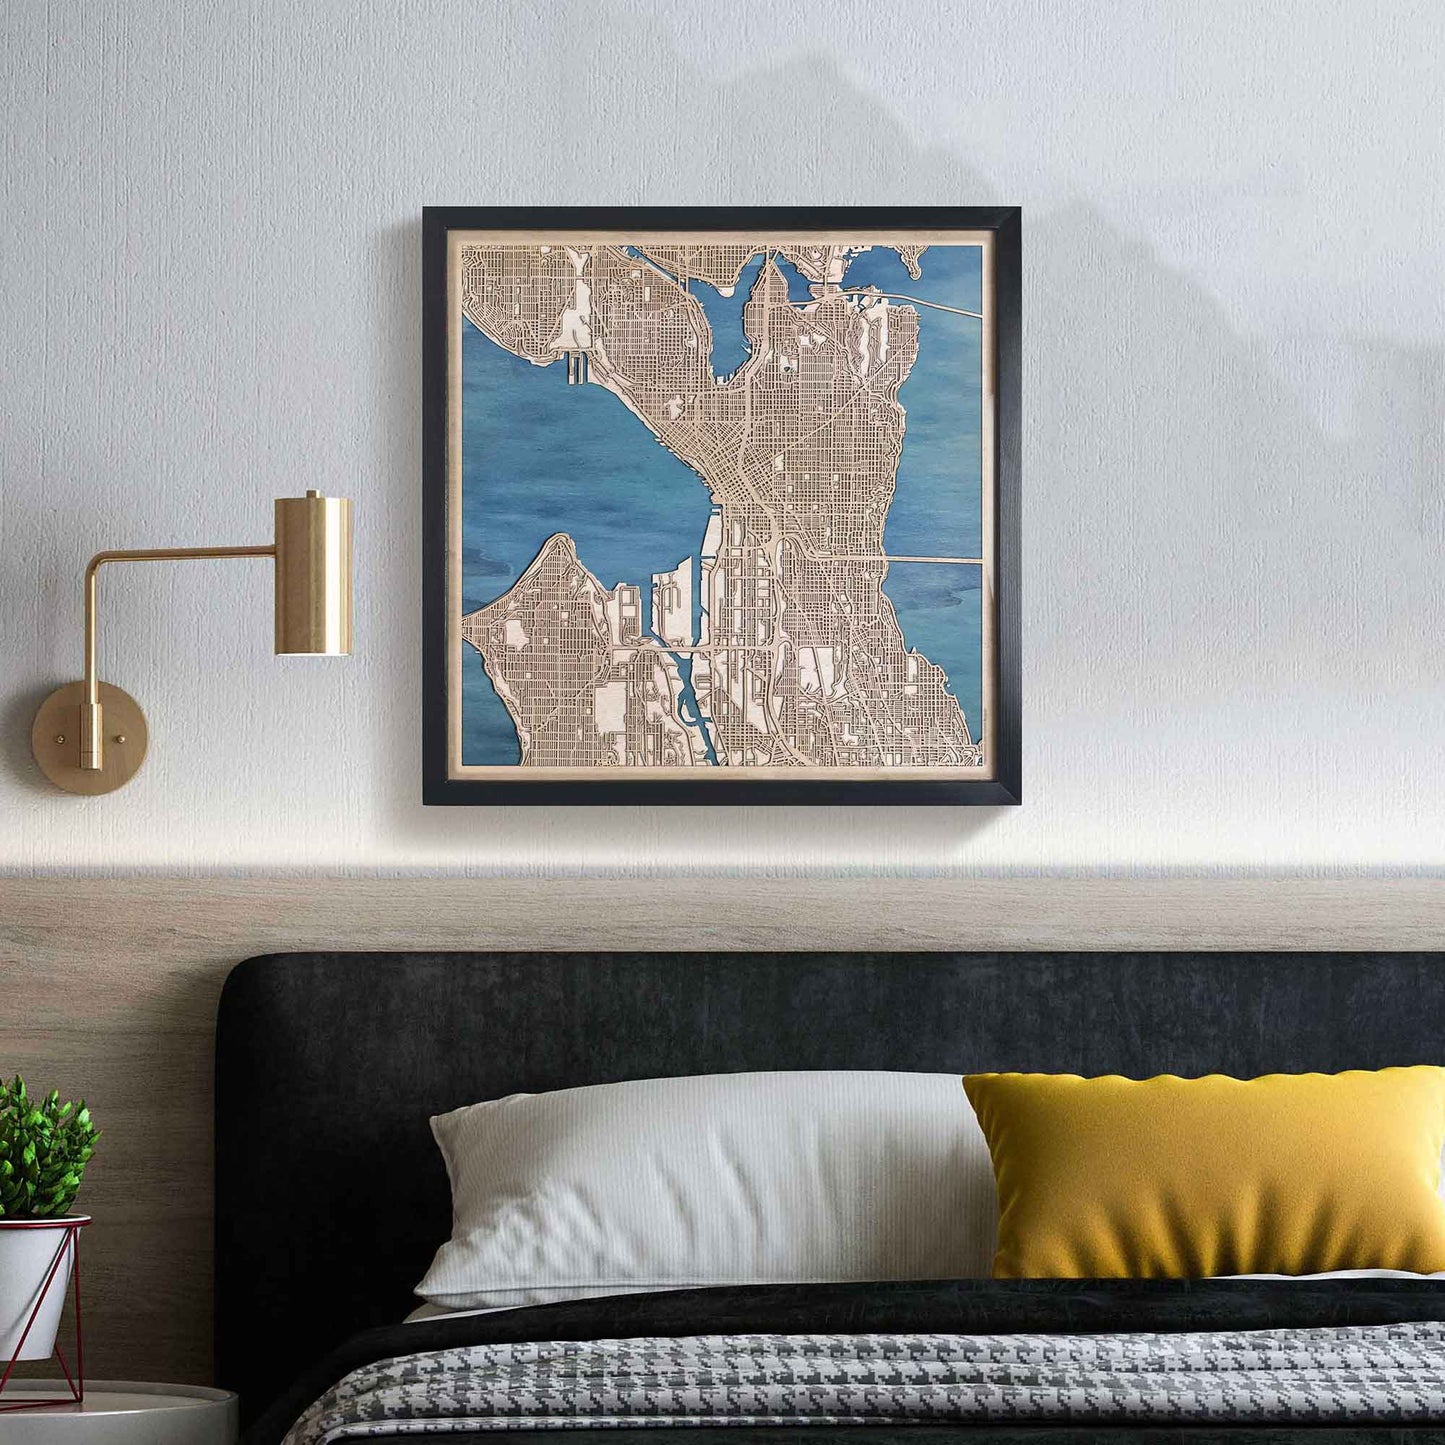 Seattle Wooden Map by CityWood - Custom Wood Map Art - Unique Laser Cut Engraved - Anniversary Gift